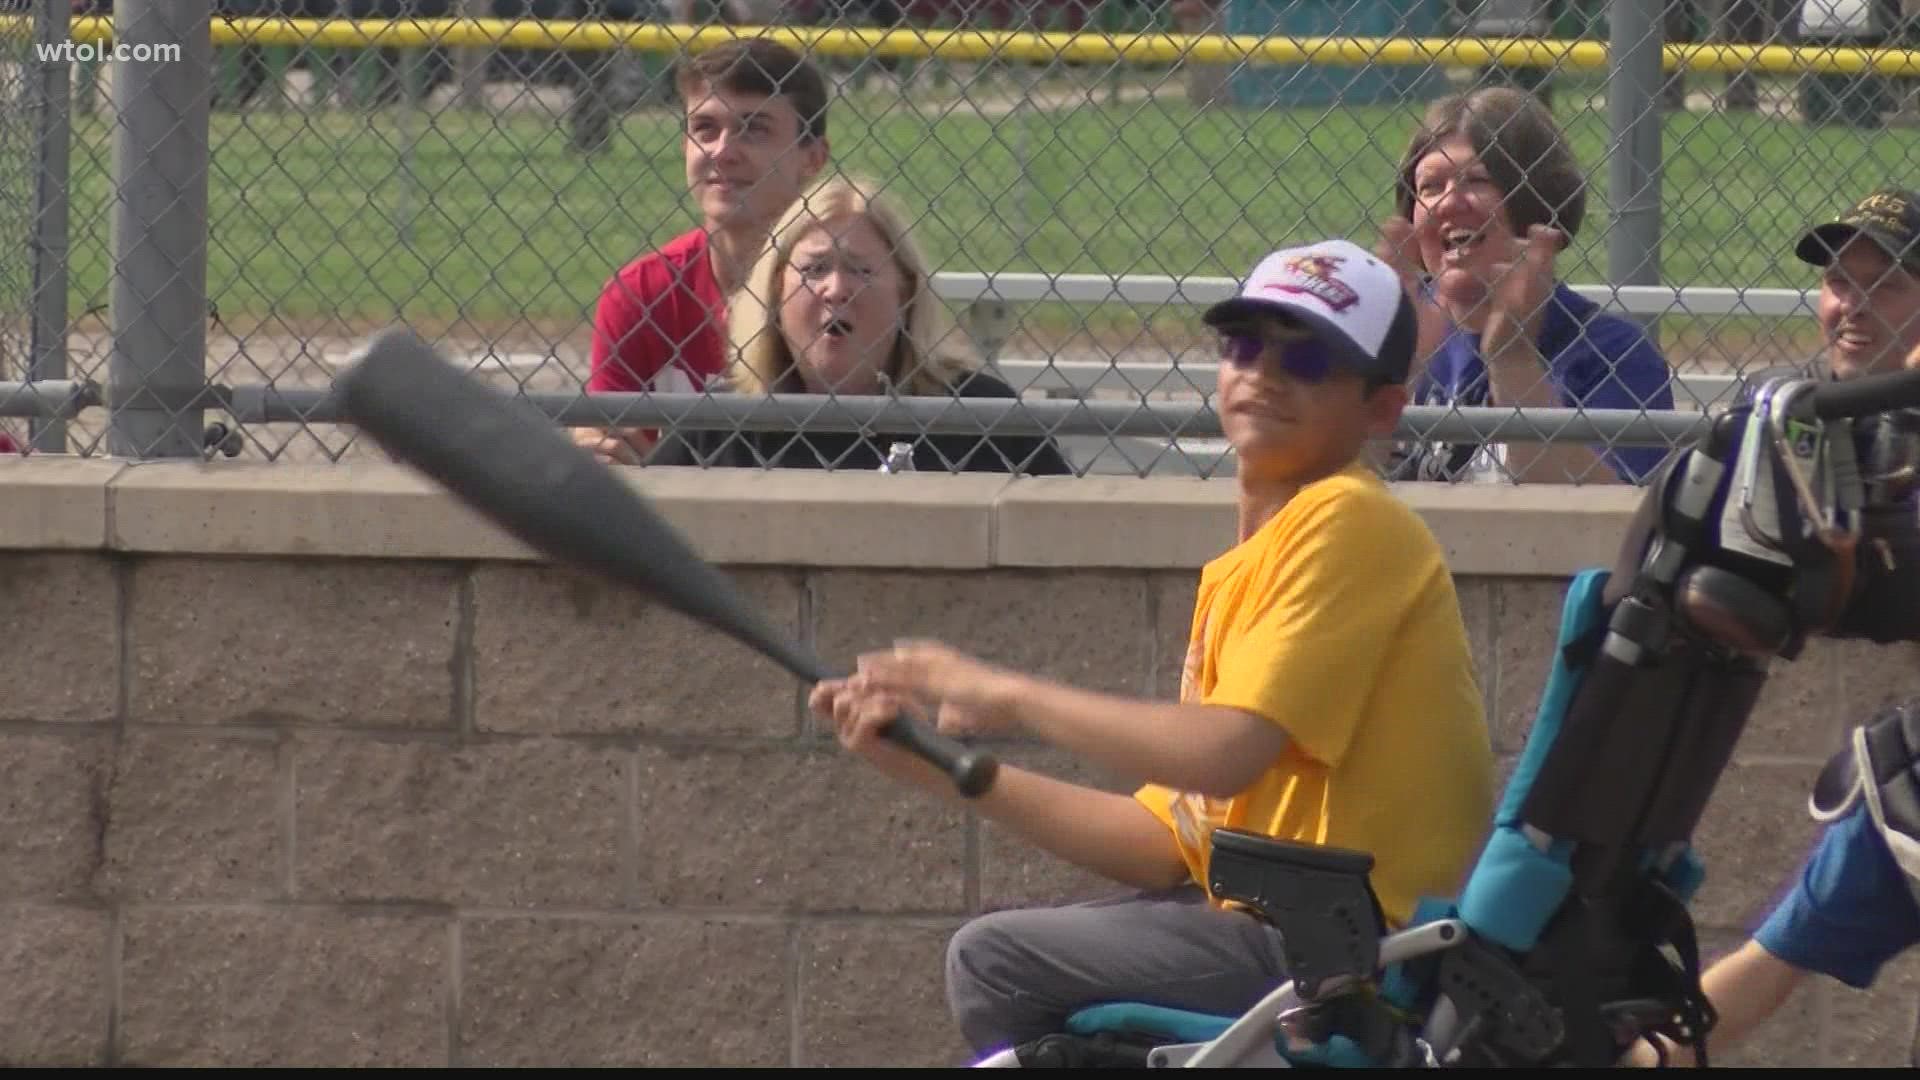 Miracle League gives players of all abilities a chance to play baseball. A new multi-use building gives them room for concessions, bathrooms, scorekeeping and more.